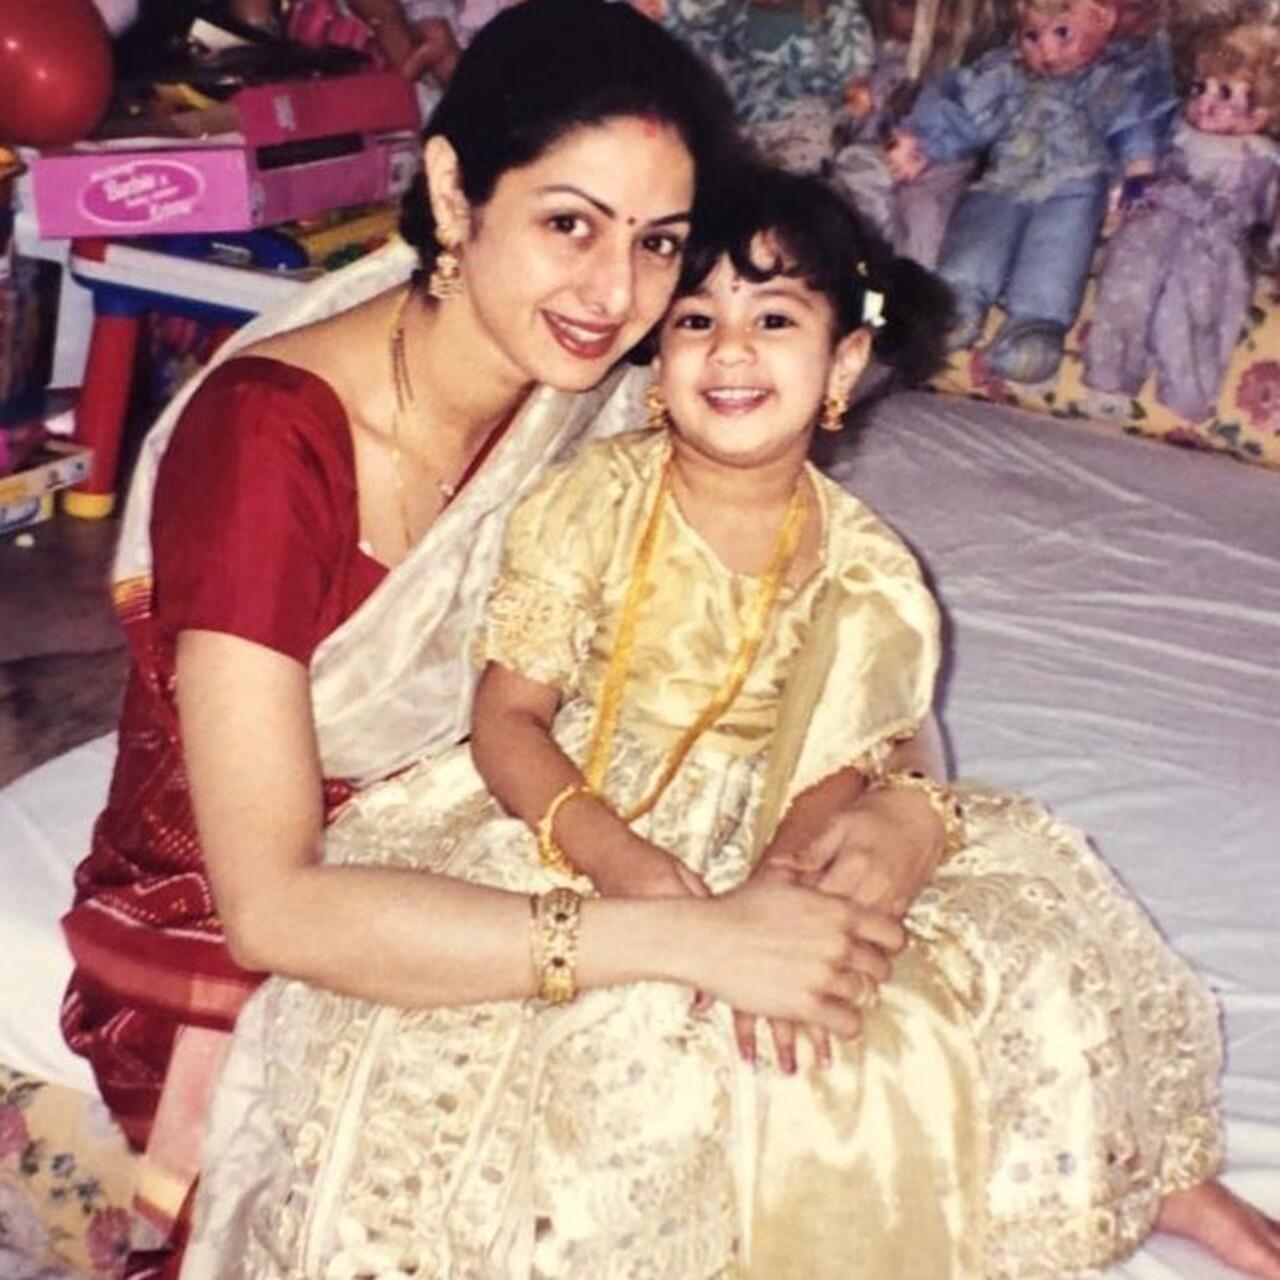 Janhvi Kapoor and the gorgeous late Sridevi during a festival. Some true mother-daughter bonding happening in this throback photo!